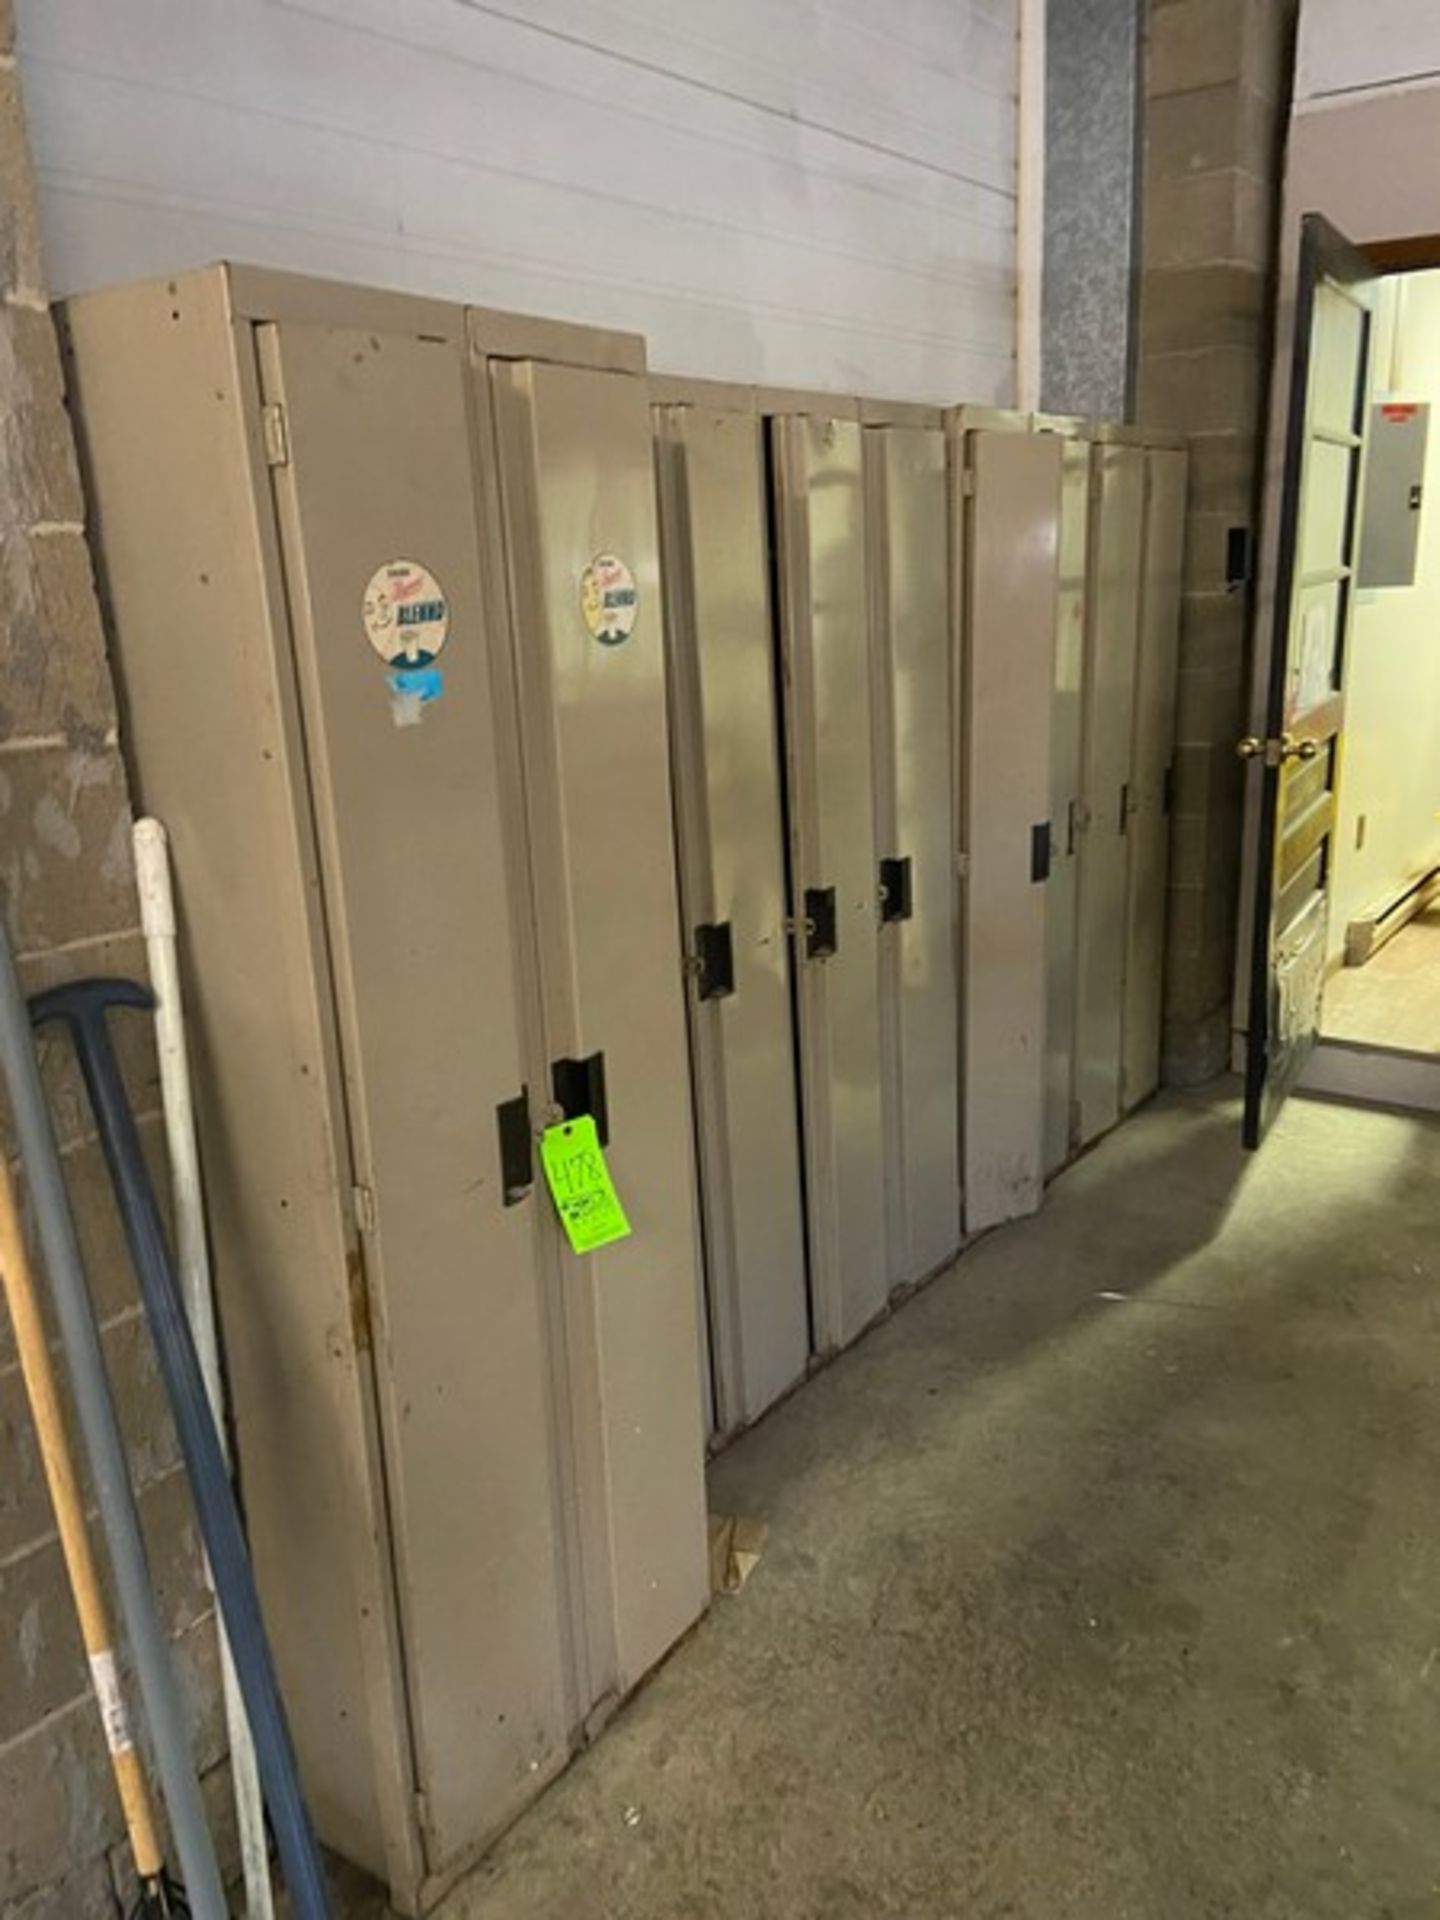 10-SECTIONS OF VERTICAL LOCKERS (LOCATED IN CALLERY, PA) - Image 2 of 2